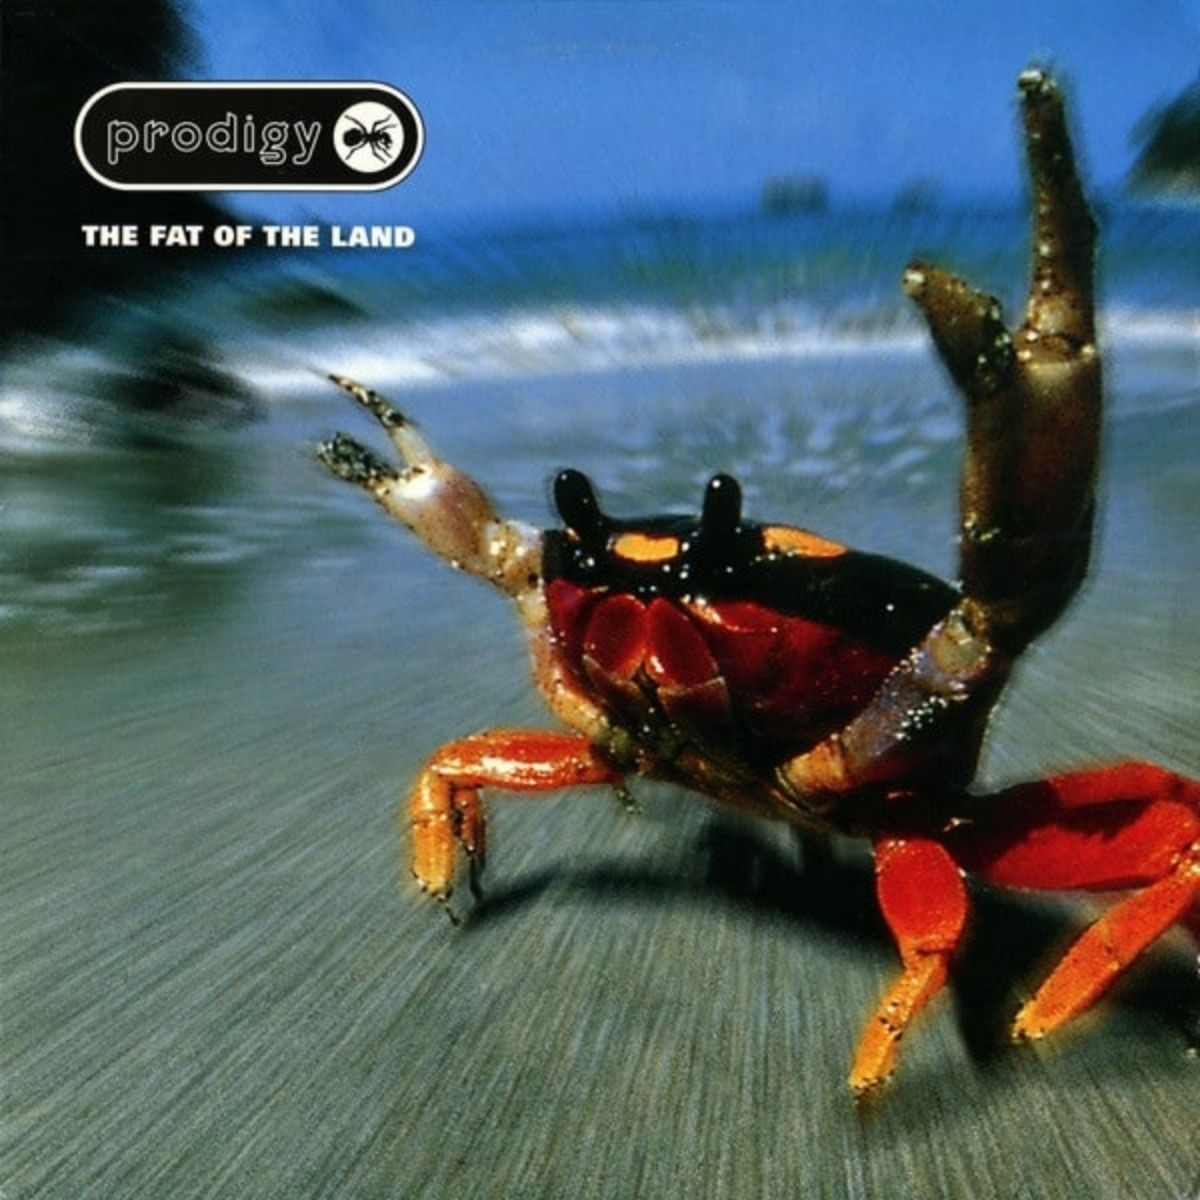 Album cover of The Fat Of The Land by The Prodigy